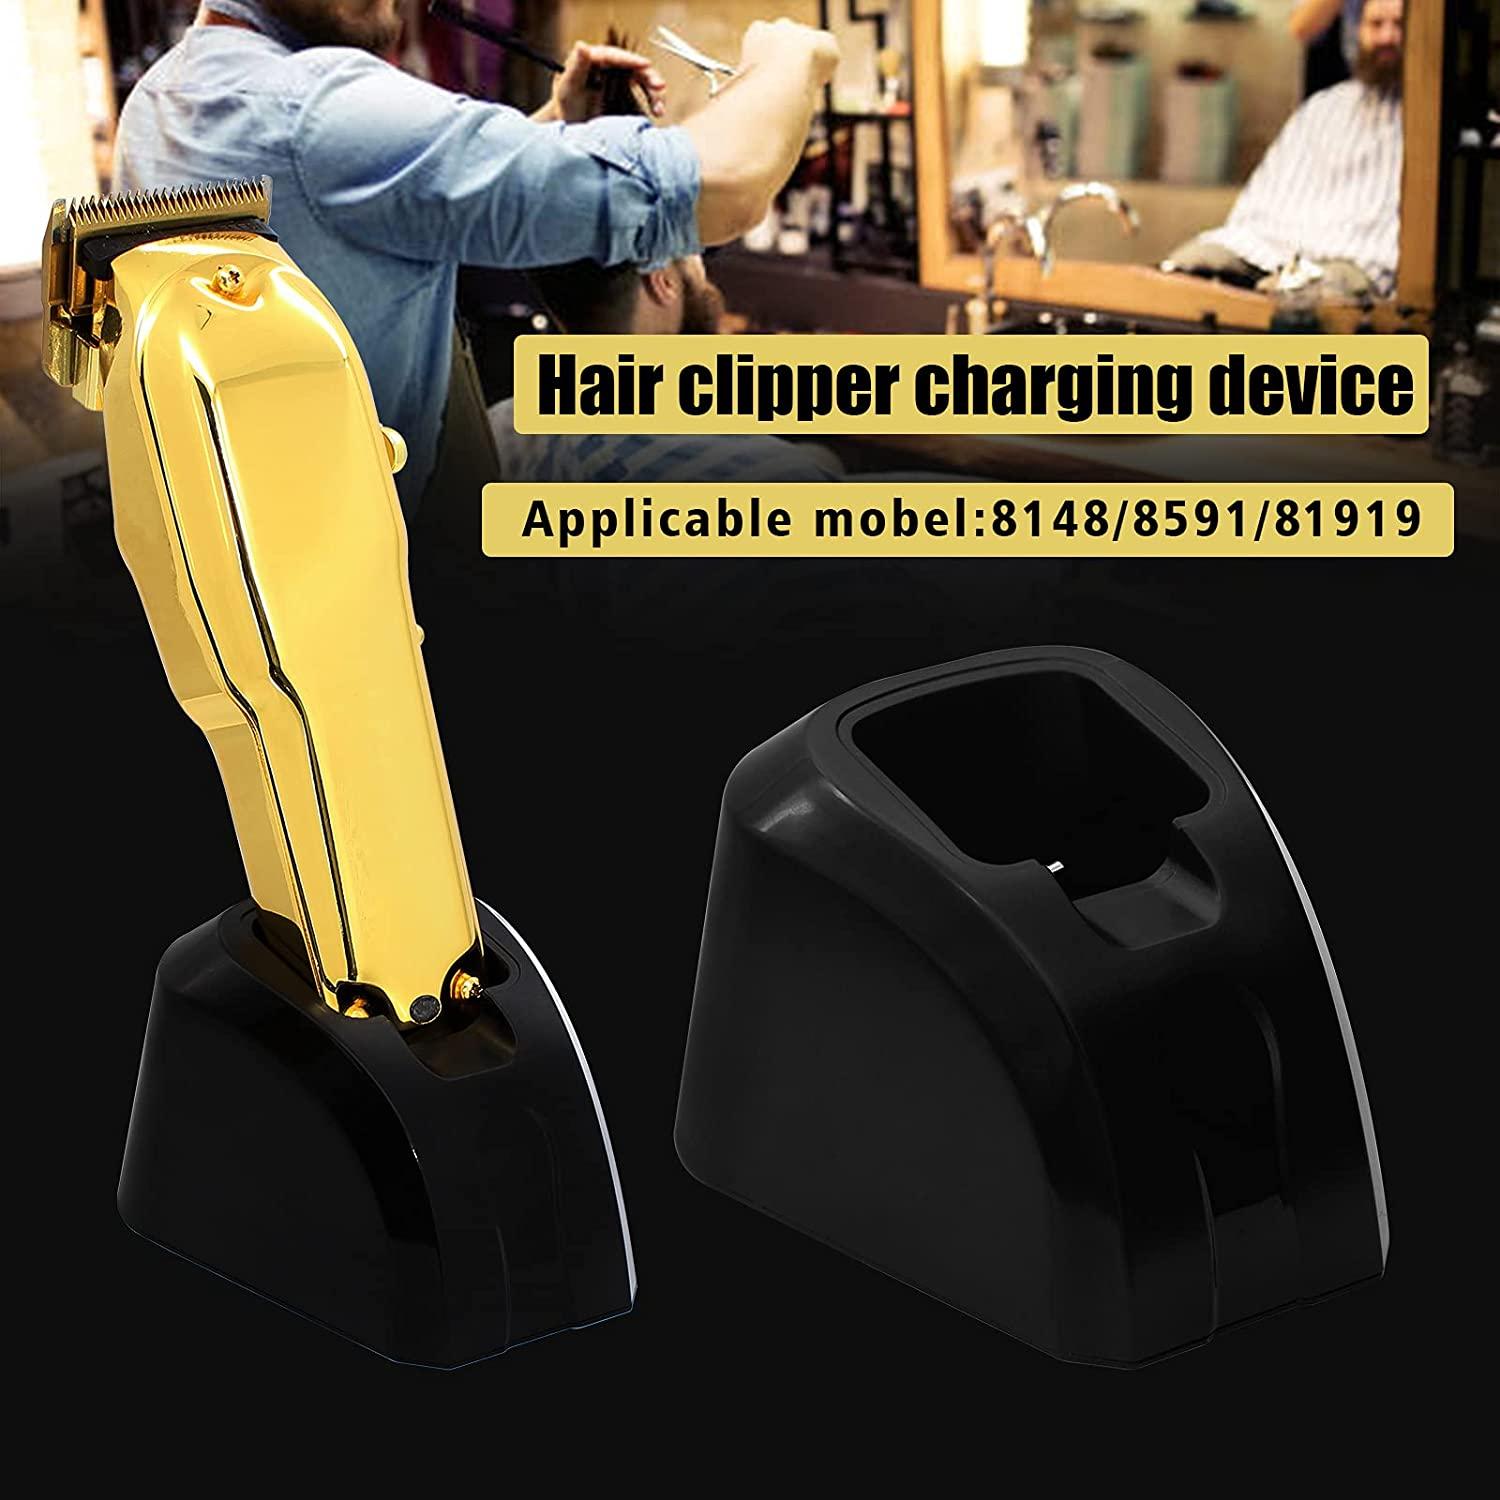  Anrom Vertical Hair Clippers Charging Stand, Portable